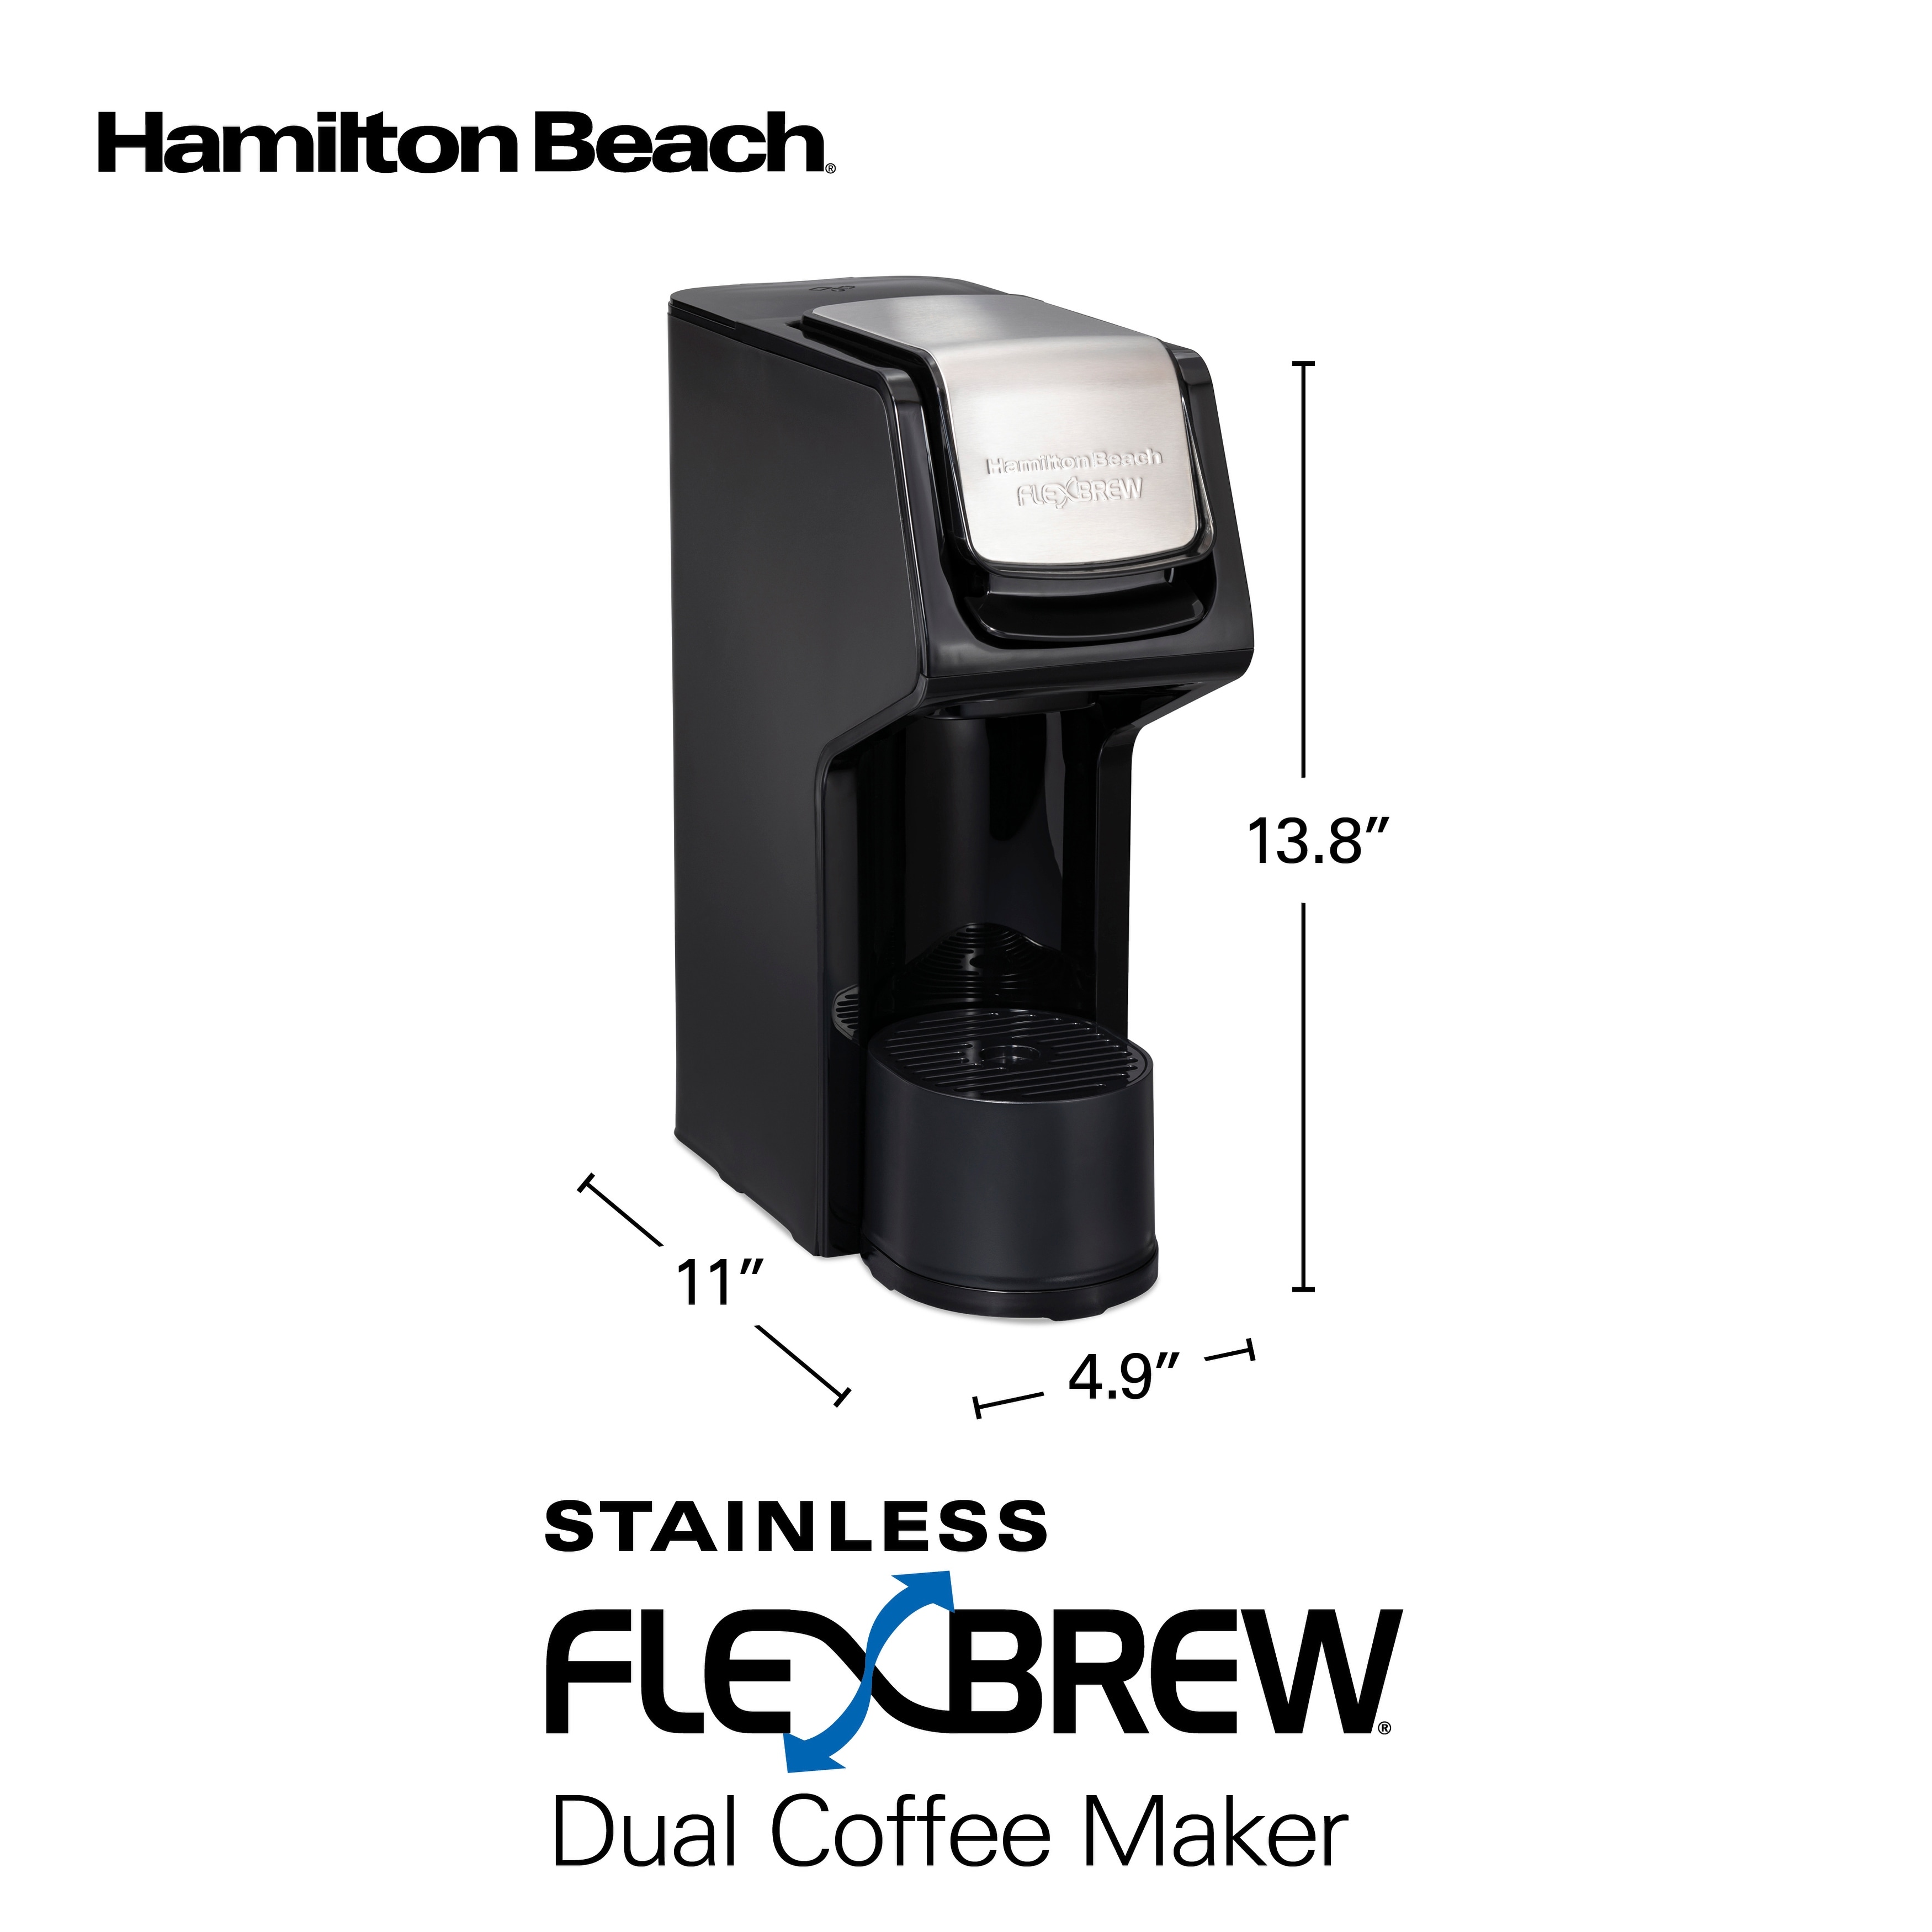 https://ak1.ostkcdn.com/images/products/is/images/direct/eb3d9fc96b2071e66c08ce5707f931dd325a61a3/Hamilton-Beach-FlexBrew-Dual-Coffee-Maker.jpg